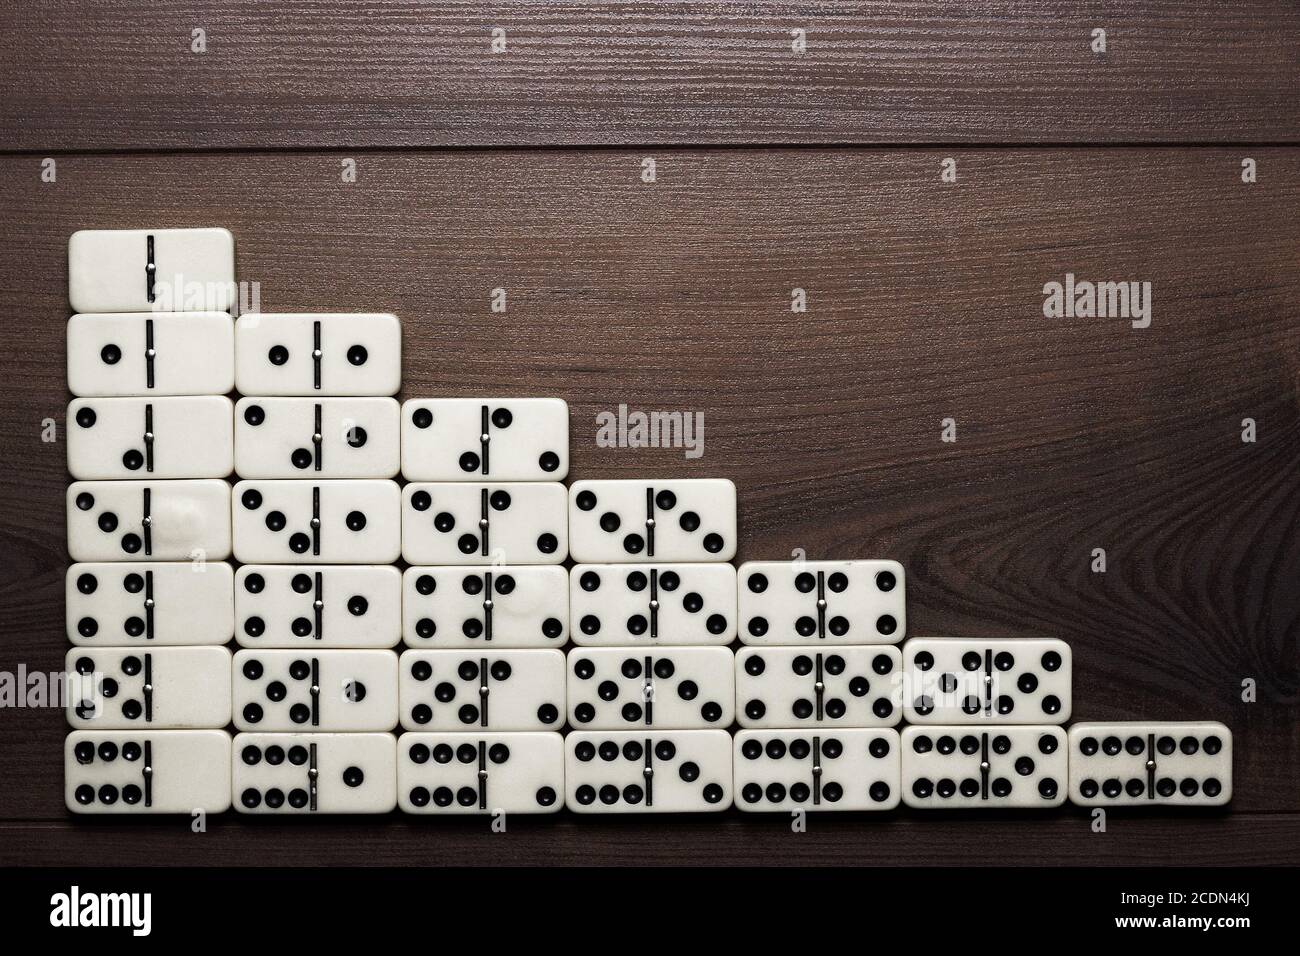 full set of domino pieces background Stock Photo - Alamy